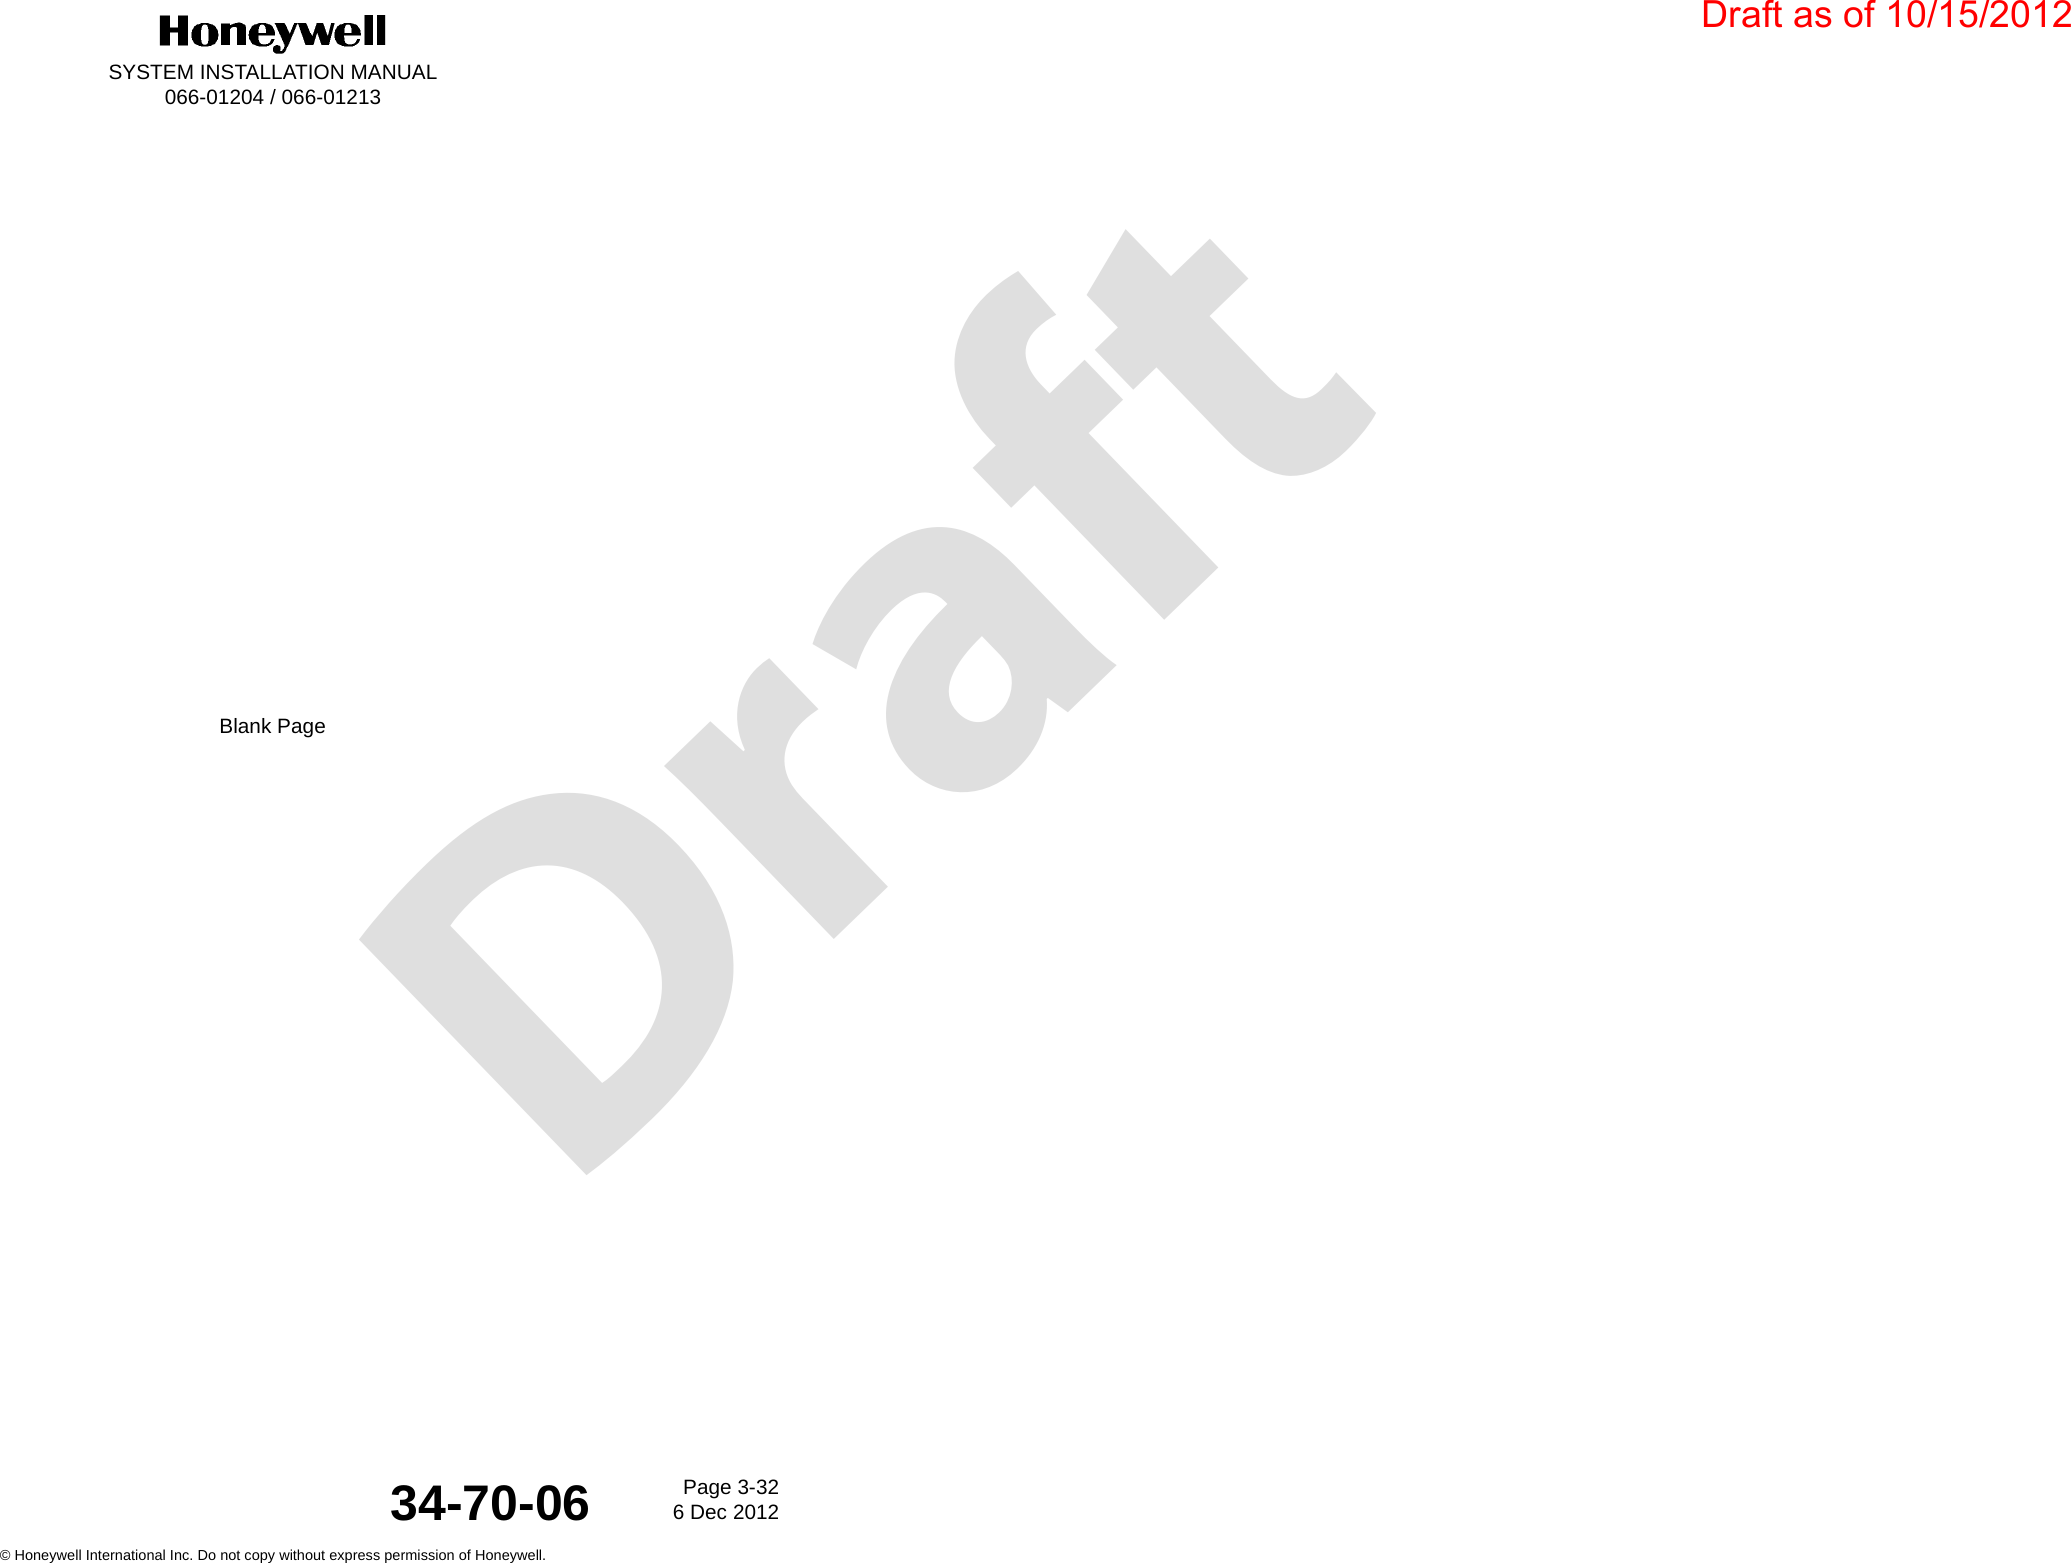 DraftSYSTEM INSTALLATION MANUAL066-01204 / 066-01213Page 3-326 Dec 2012© Honeywell International Inc. Do not copy without express permission of Honeywell.34-70-06Blank PageDraft as of 10/15/2012